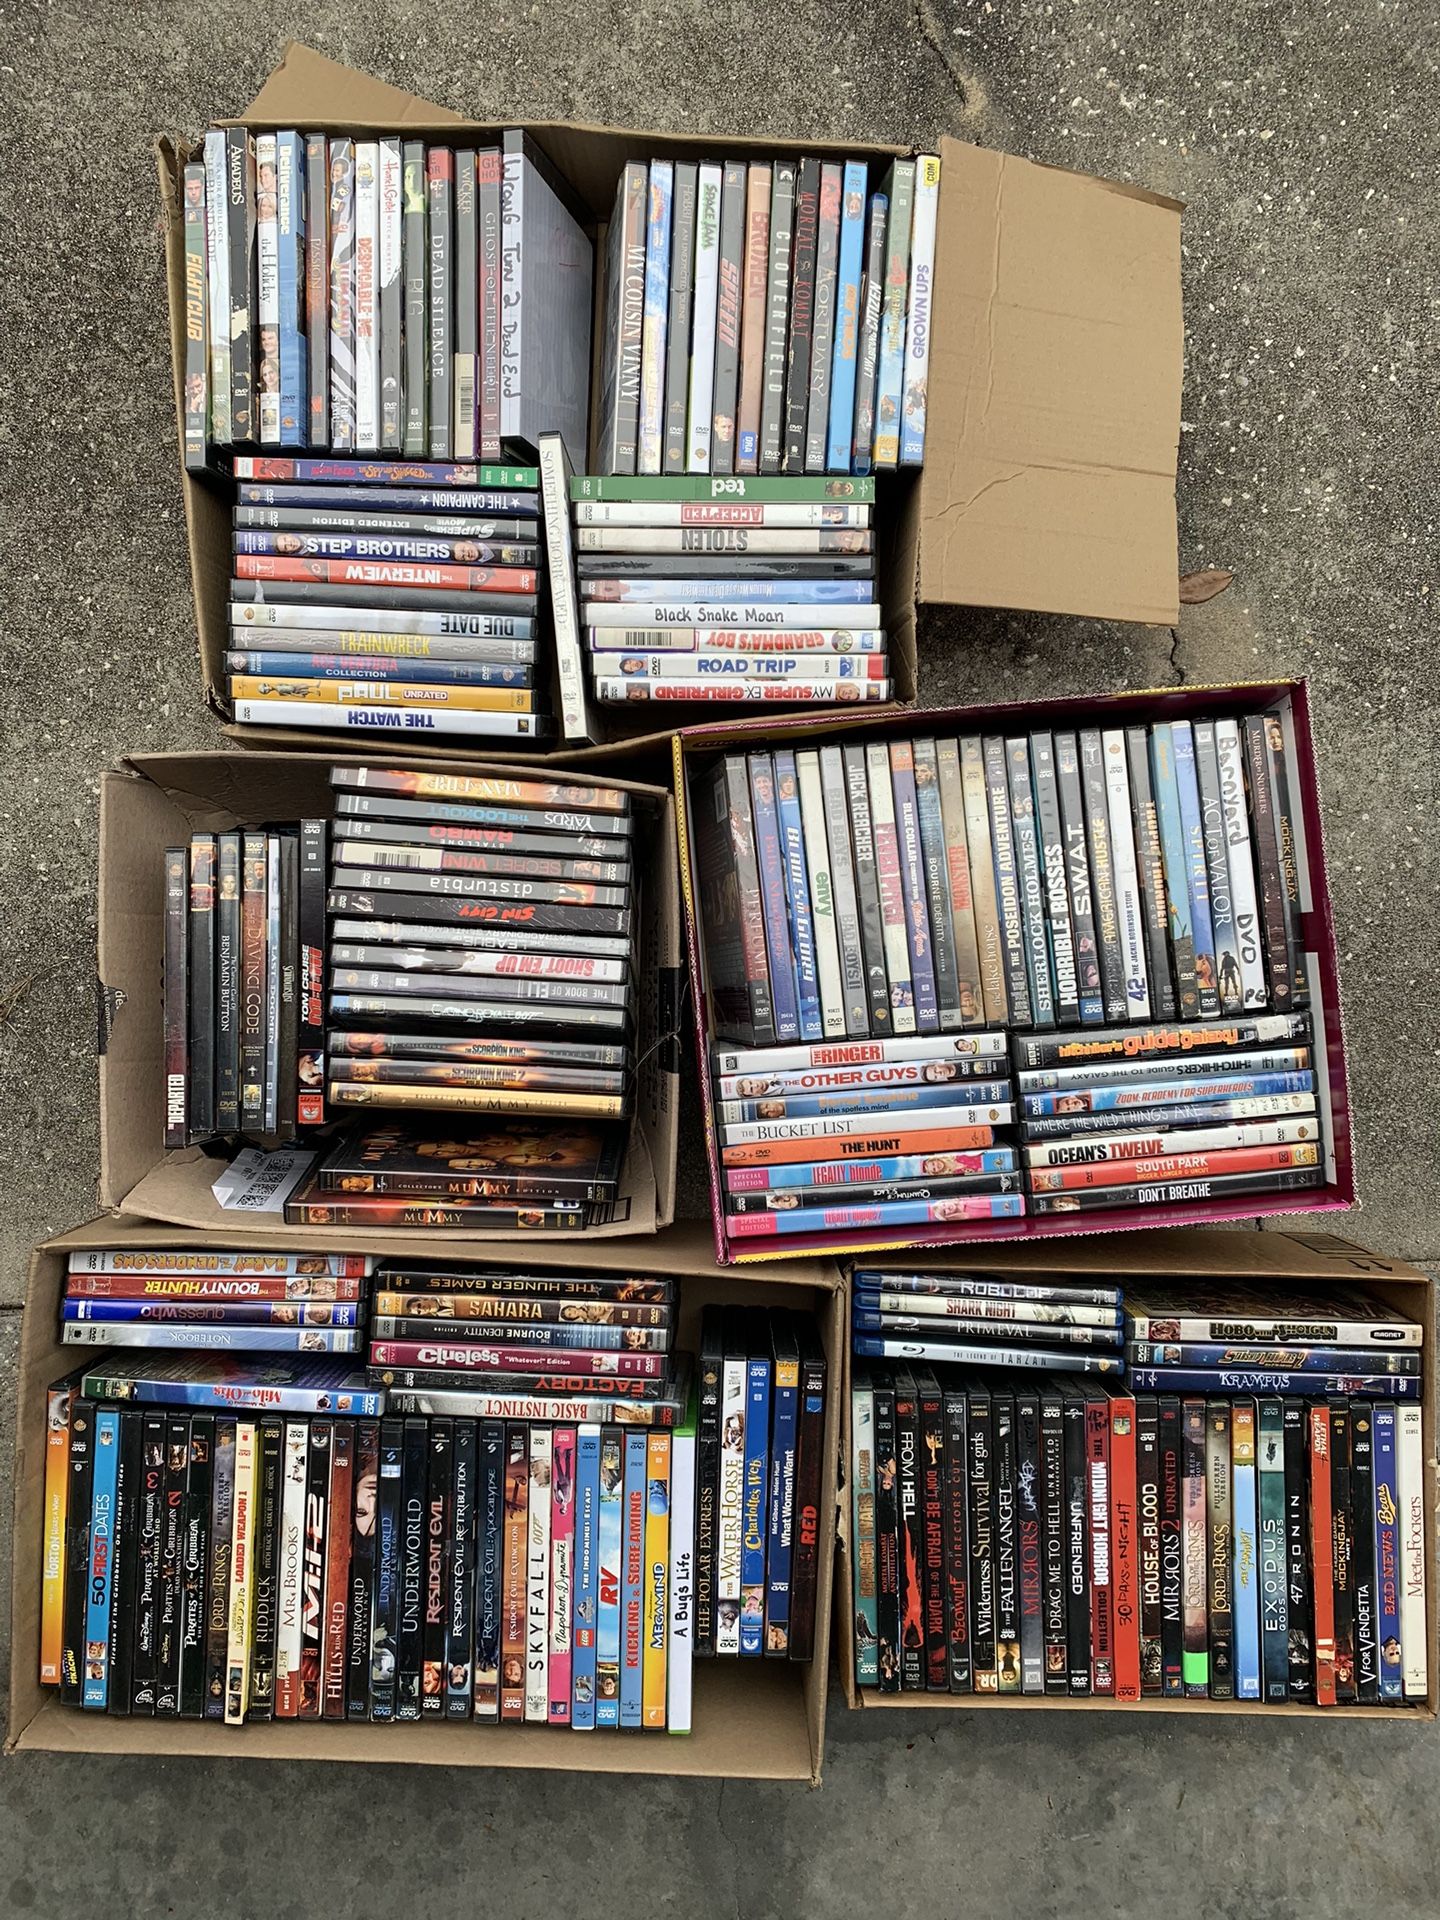 200+ DVDs and BLU-RAY